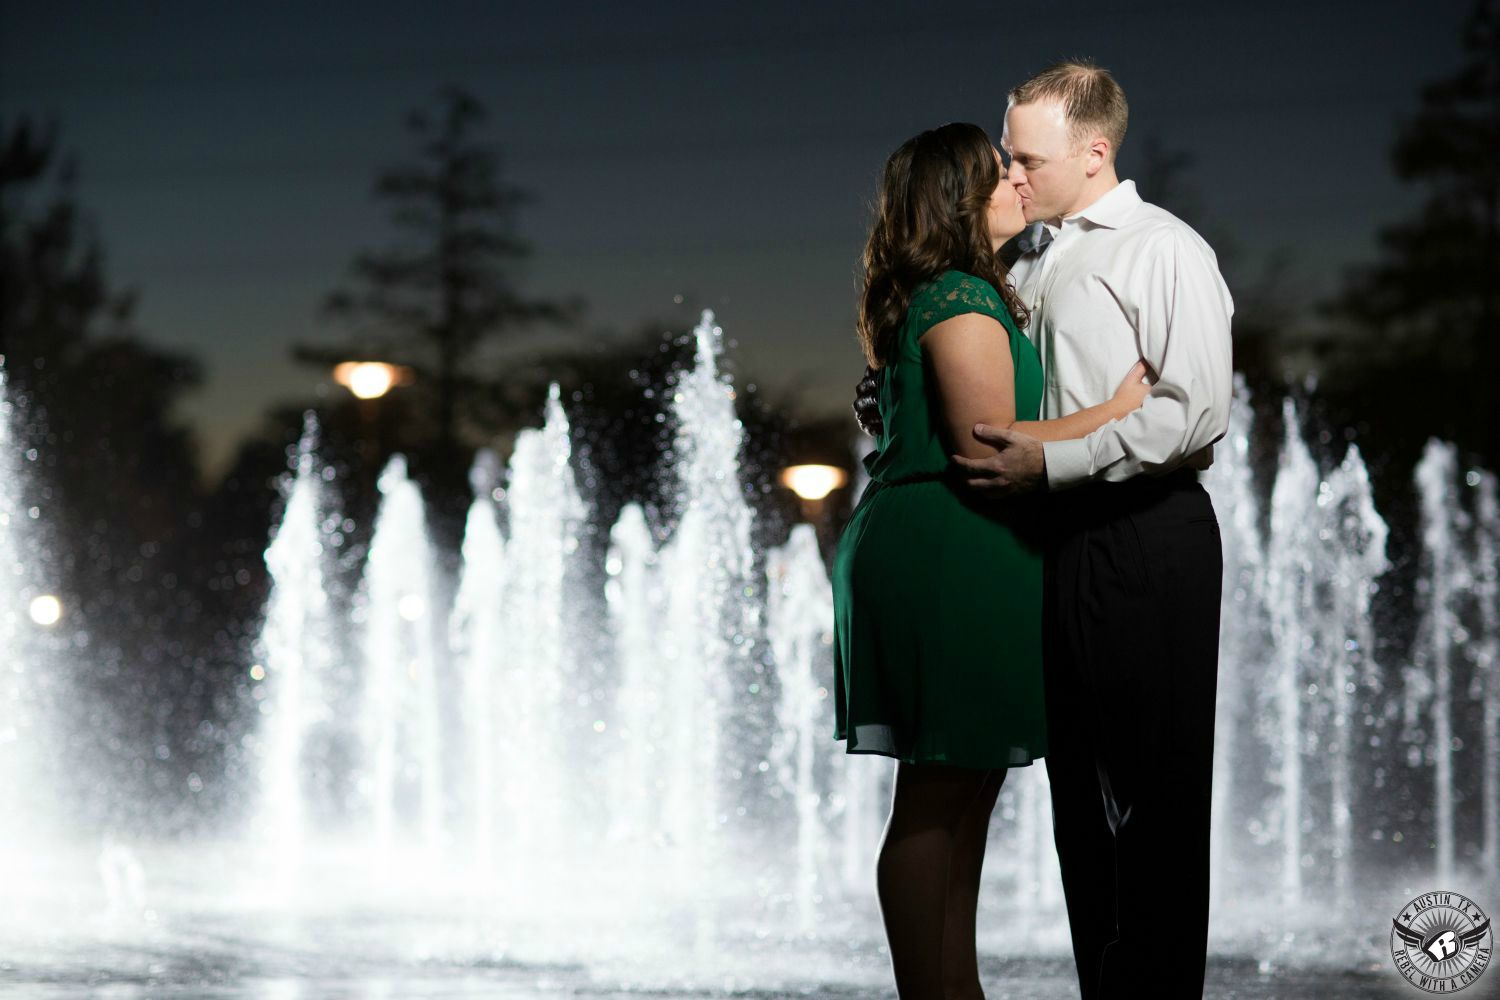 Curly haired brunette girl with a green dress with lace short sleeves embraces a sandy haired guy wearing a white button up collared shirt and black pants while kissing in front of backlit jets of water coming from the ground at the Liz Carpenter Fountain at Butler Park at dusk with dark blue twilight sky in the background in this strobe influenced engagement session in Austin.